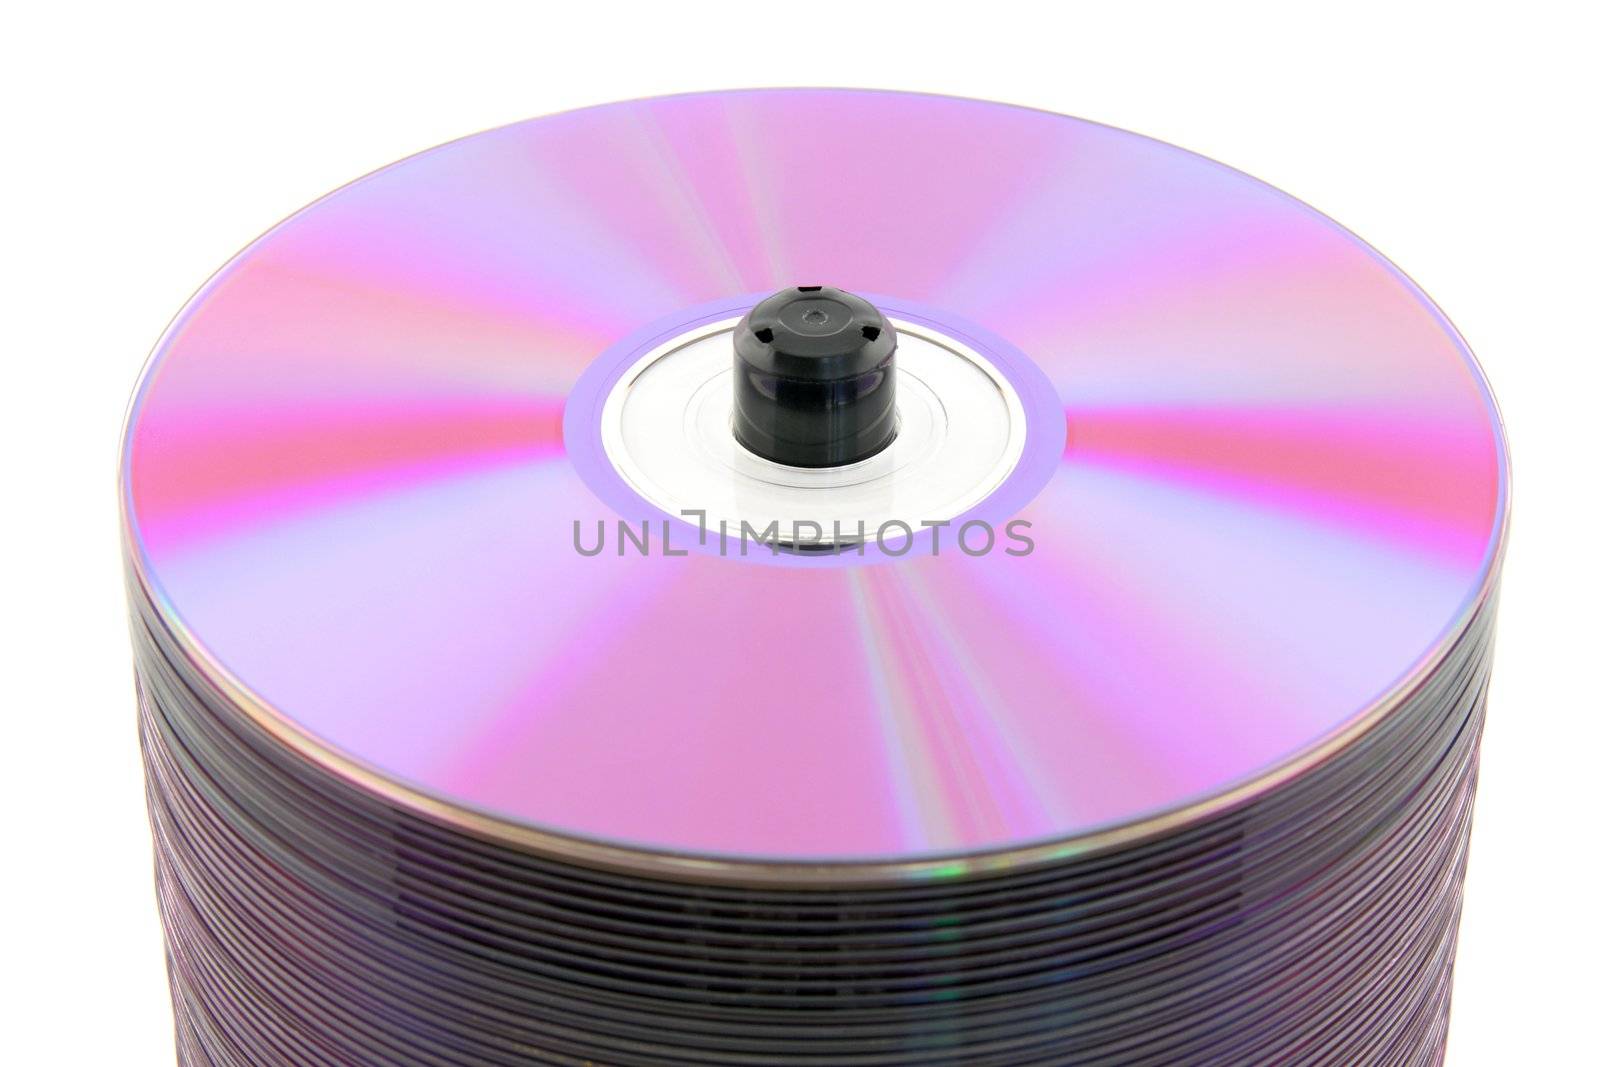 Close-up of purple DVDs or CDs on spindle, on white background. No dust.